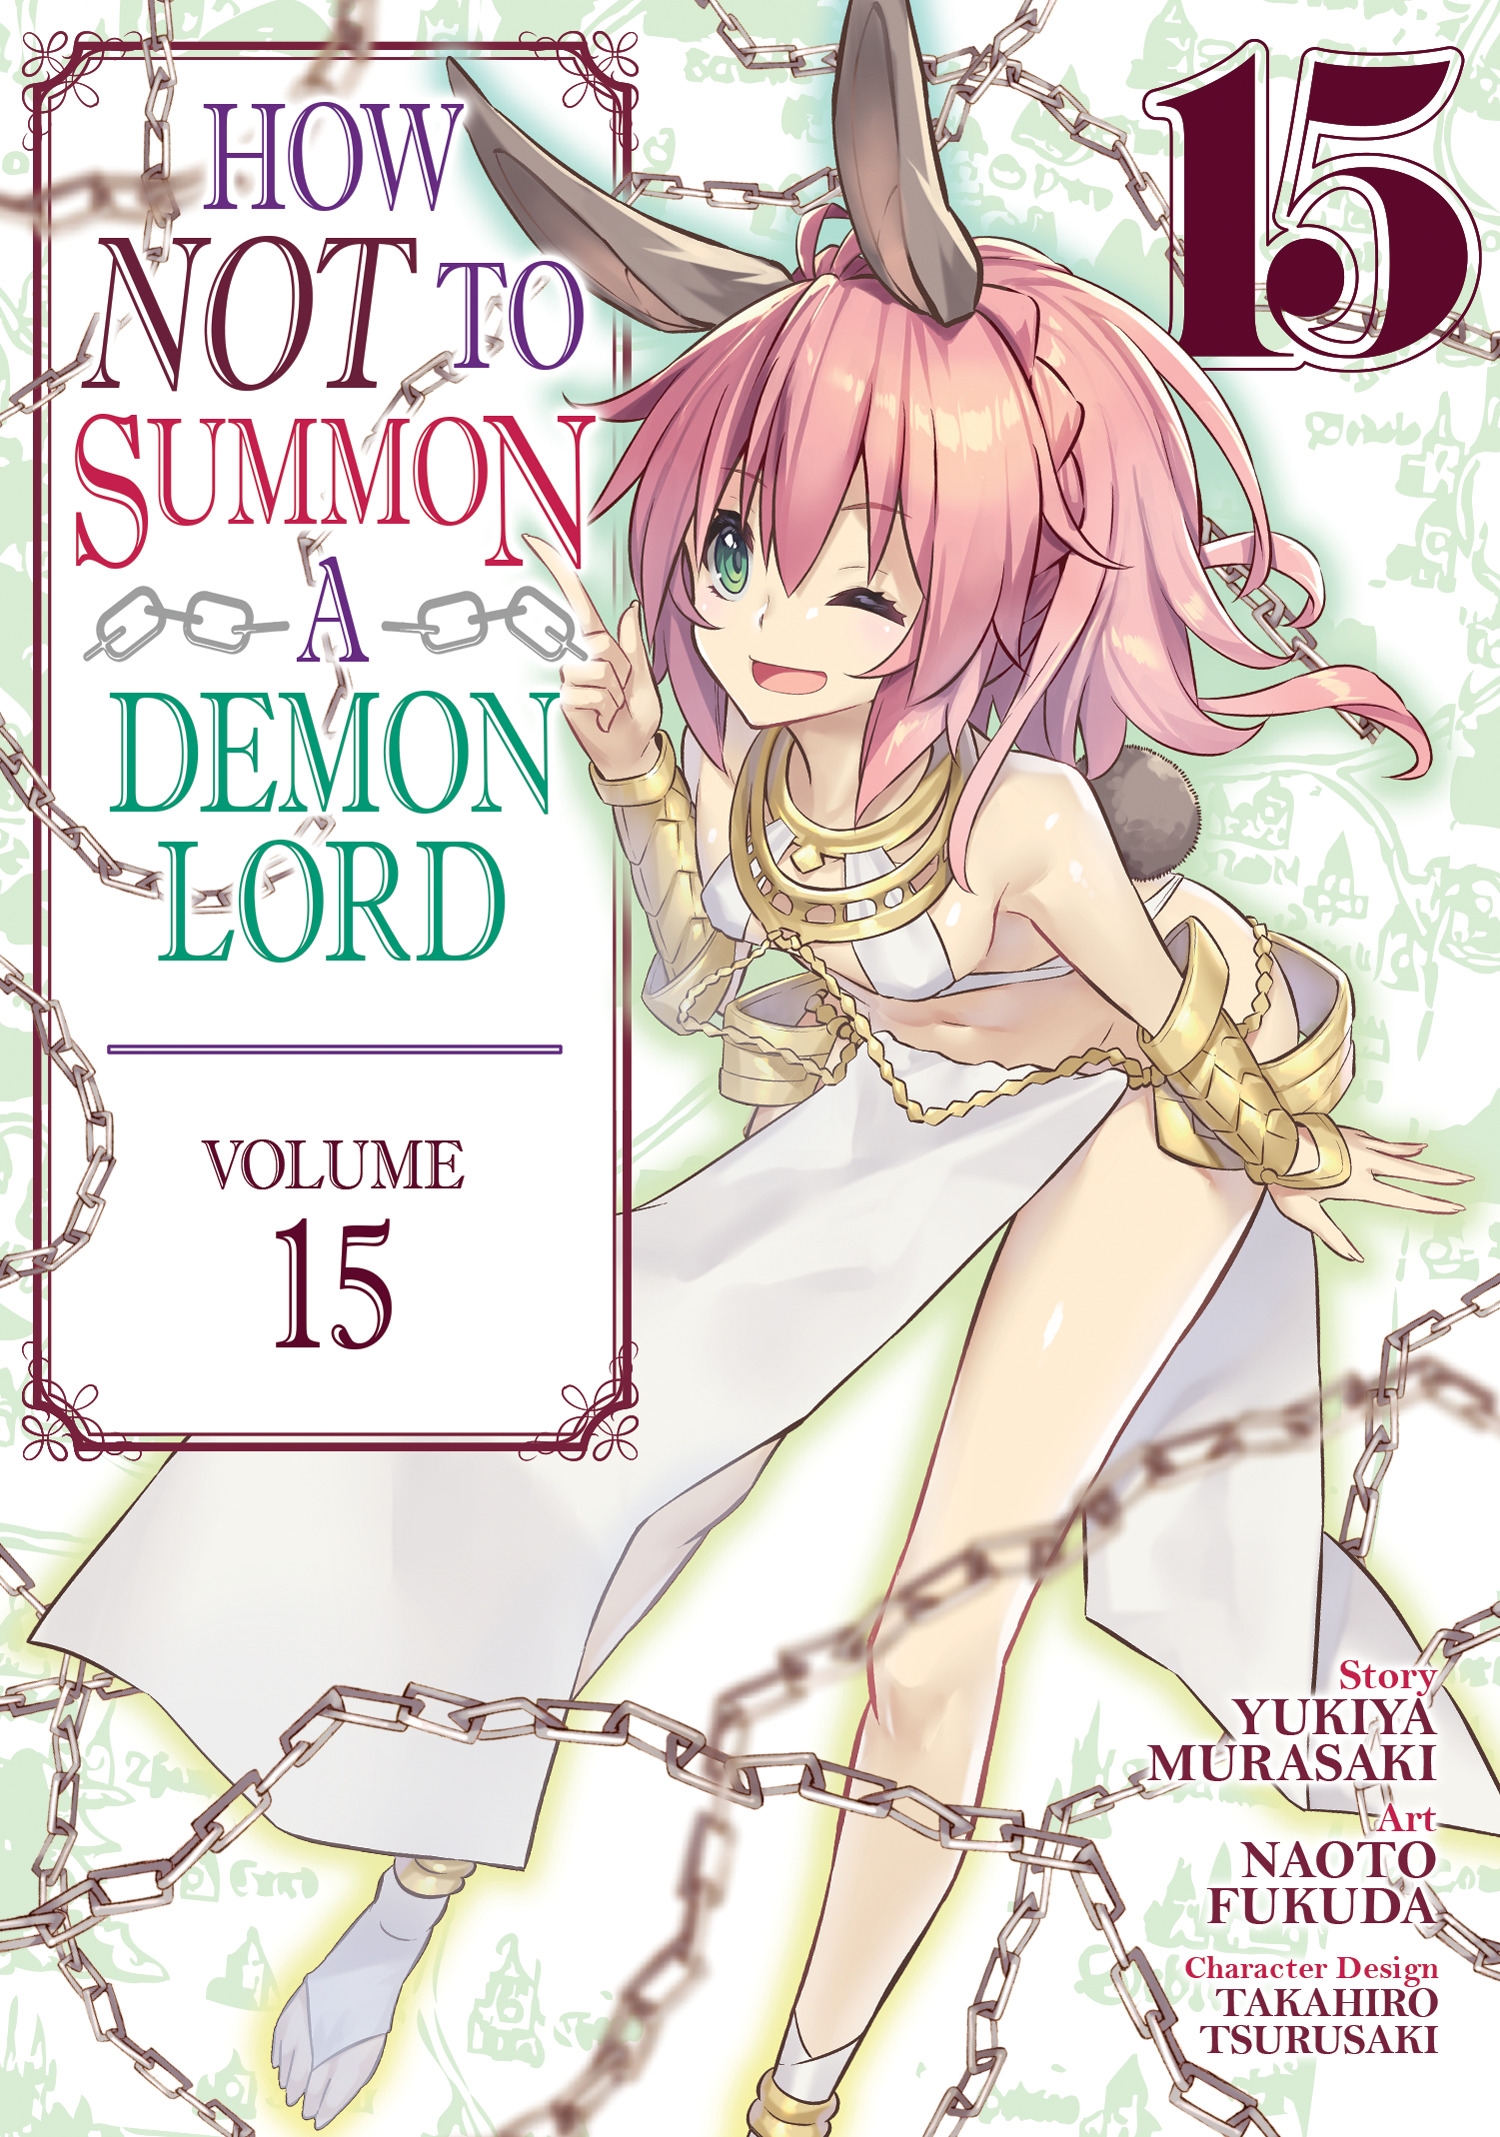 How NOT to Summon a Lord Vol. 15 by Murasaki - Penguin Books New Zealand